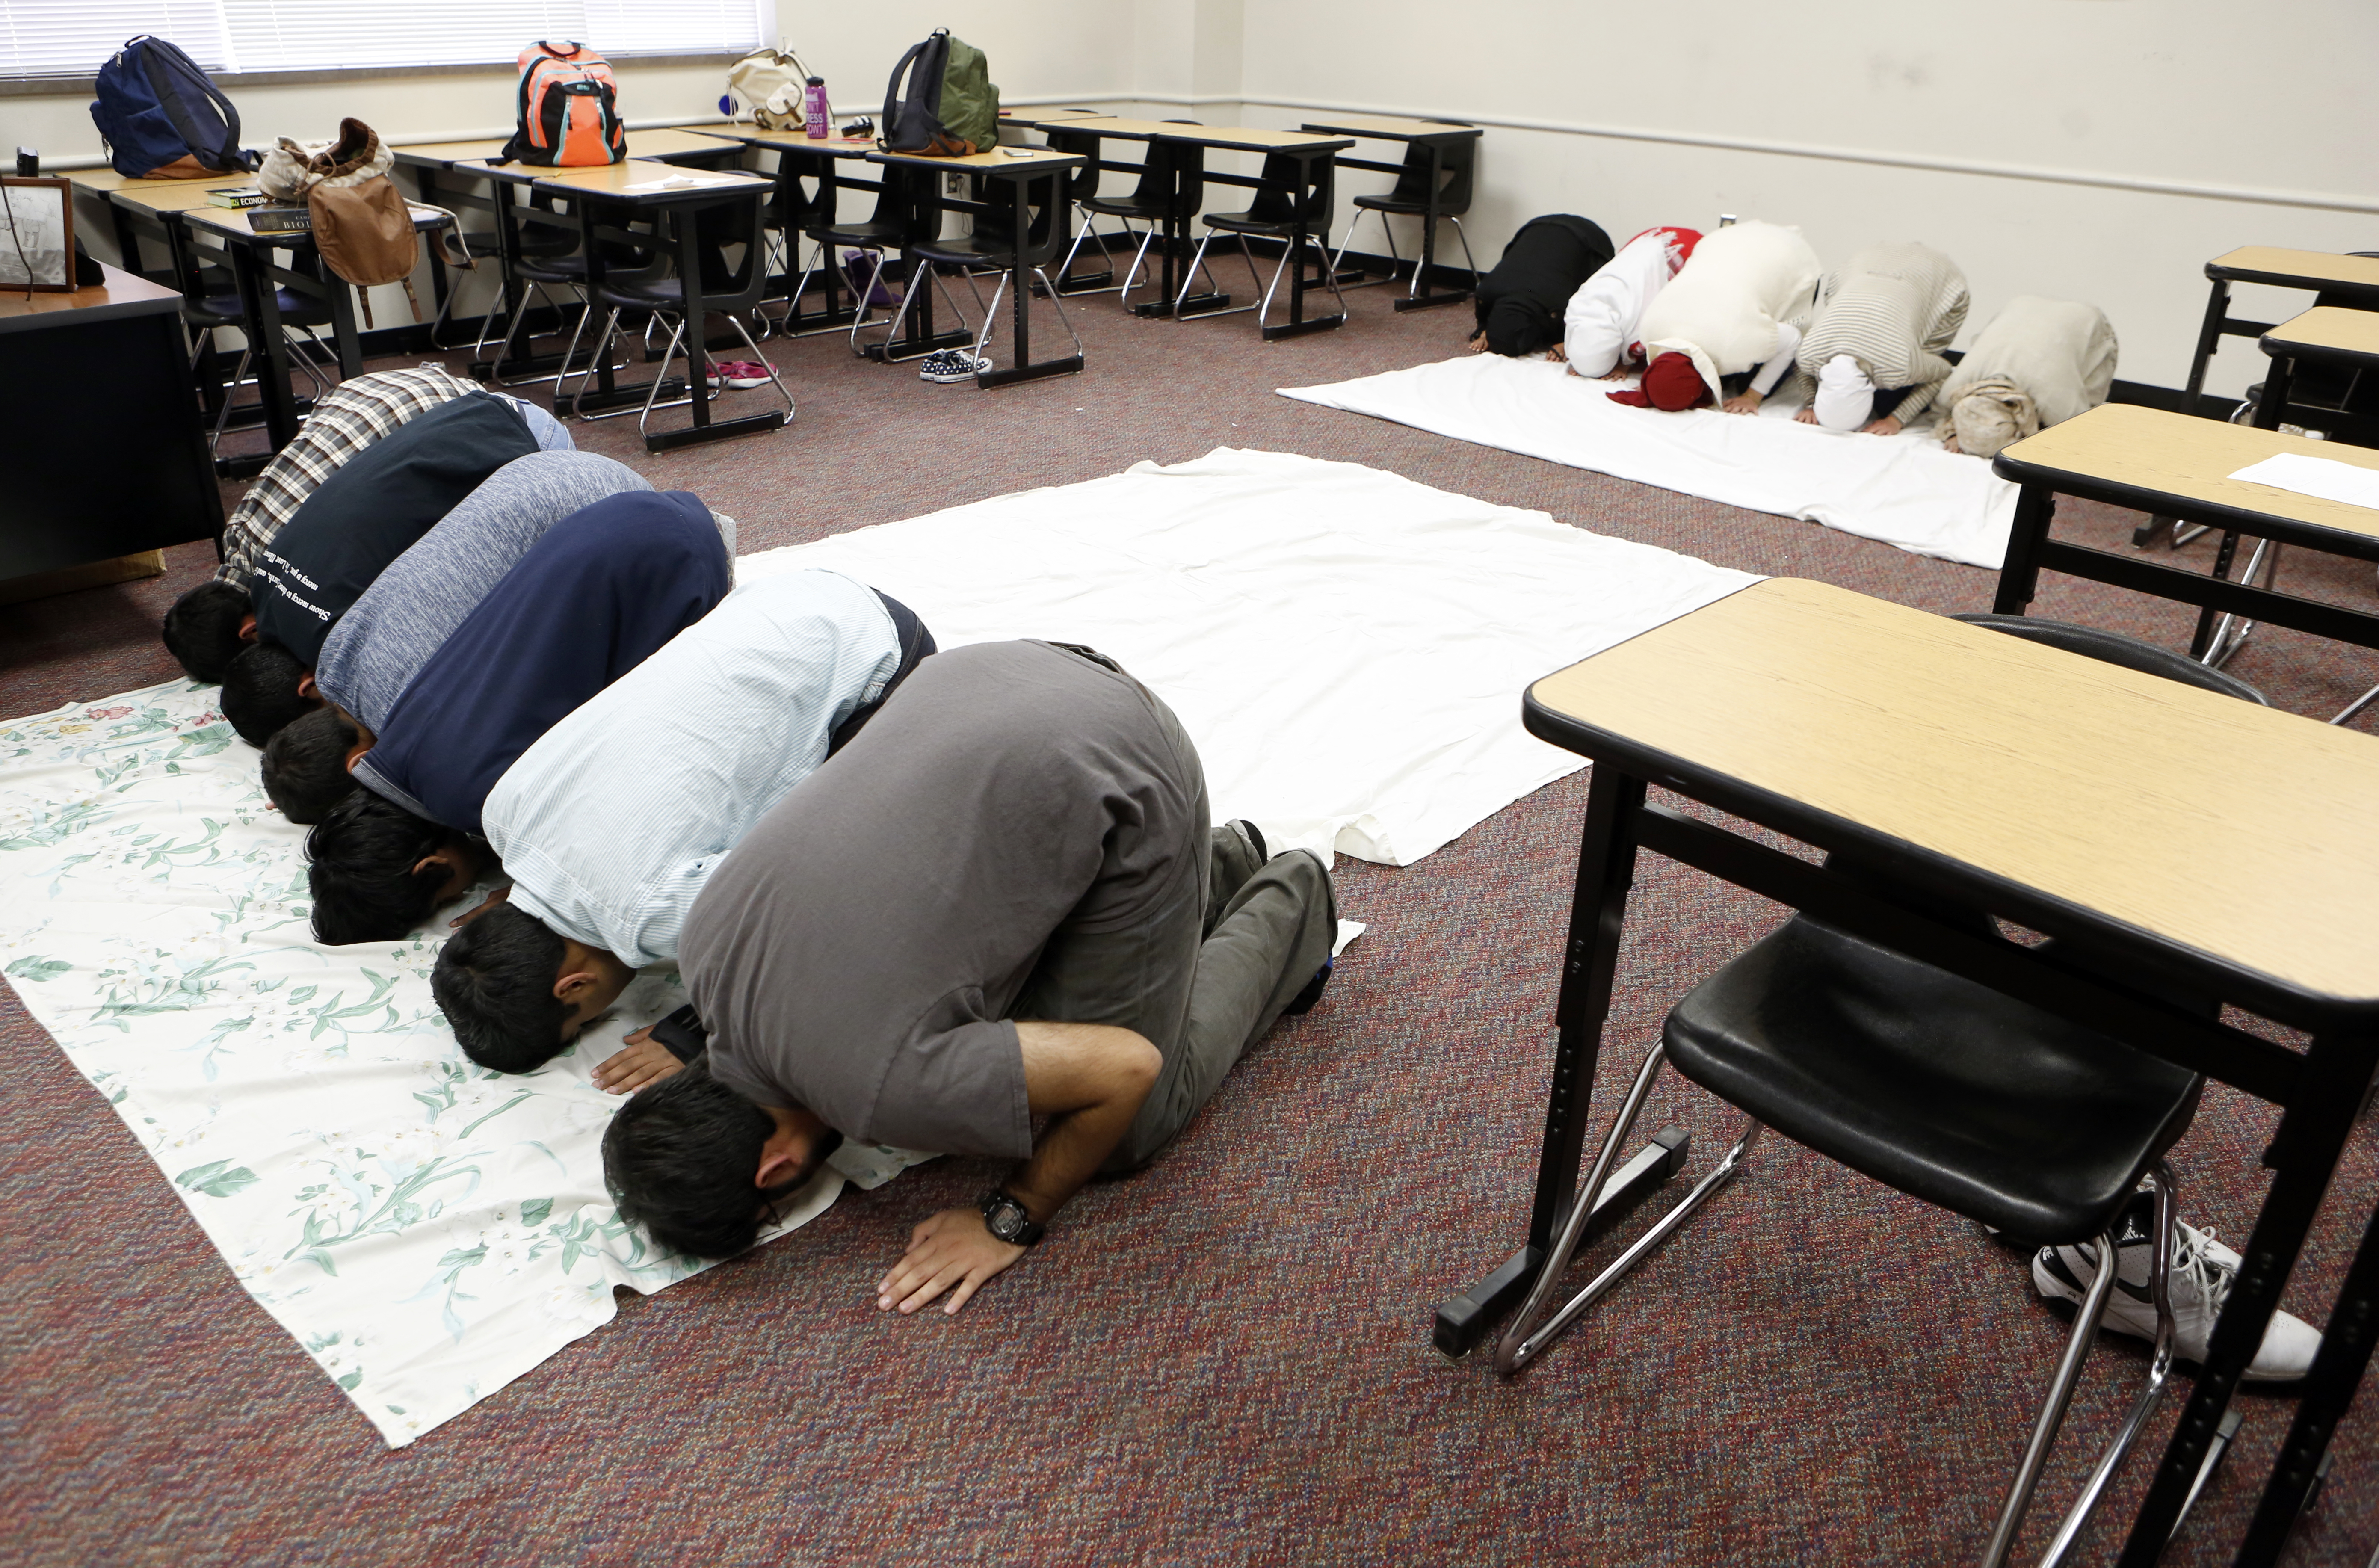 Muslim students gather to pray inside a classroom at Liberty High School in Frisco. This longtime white district is quickly becoming more diverse. At Liberty High, a quarter of the kids are Asian. Ten percent are Hispanic; about the same number are black. Just under half are white. Photographed in Frisco, Texas on Friday, February 10, 2017. (photo © Lara Solt)